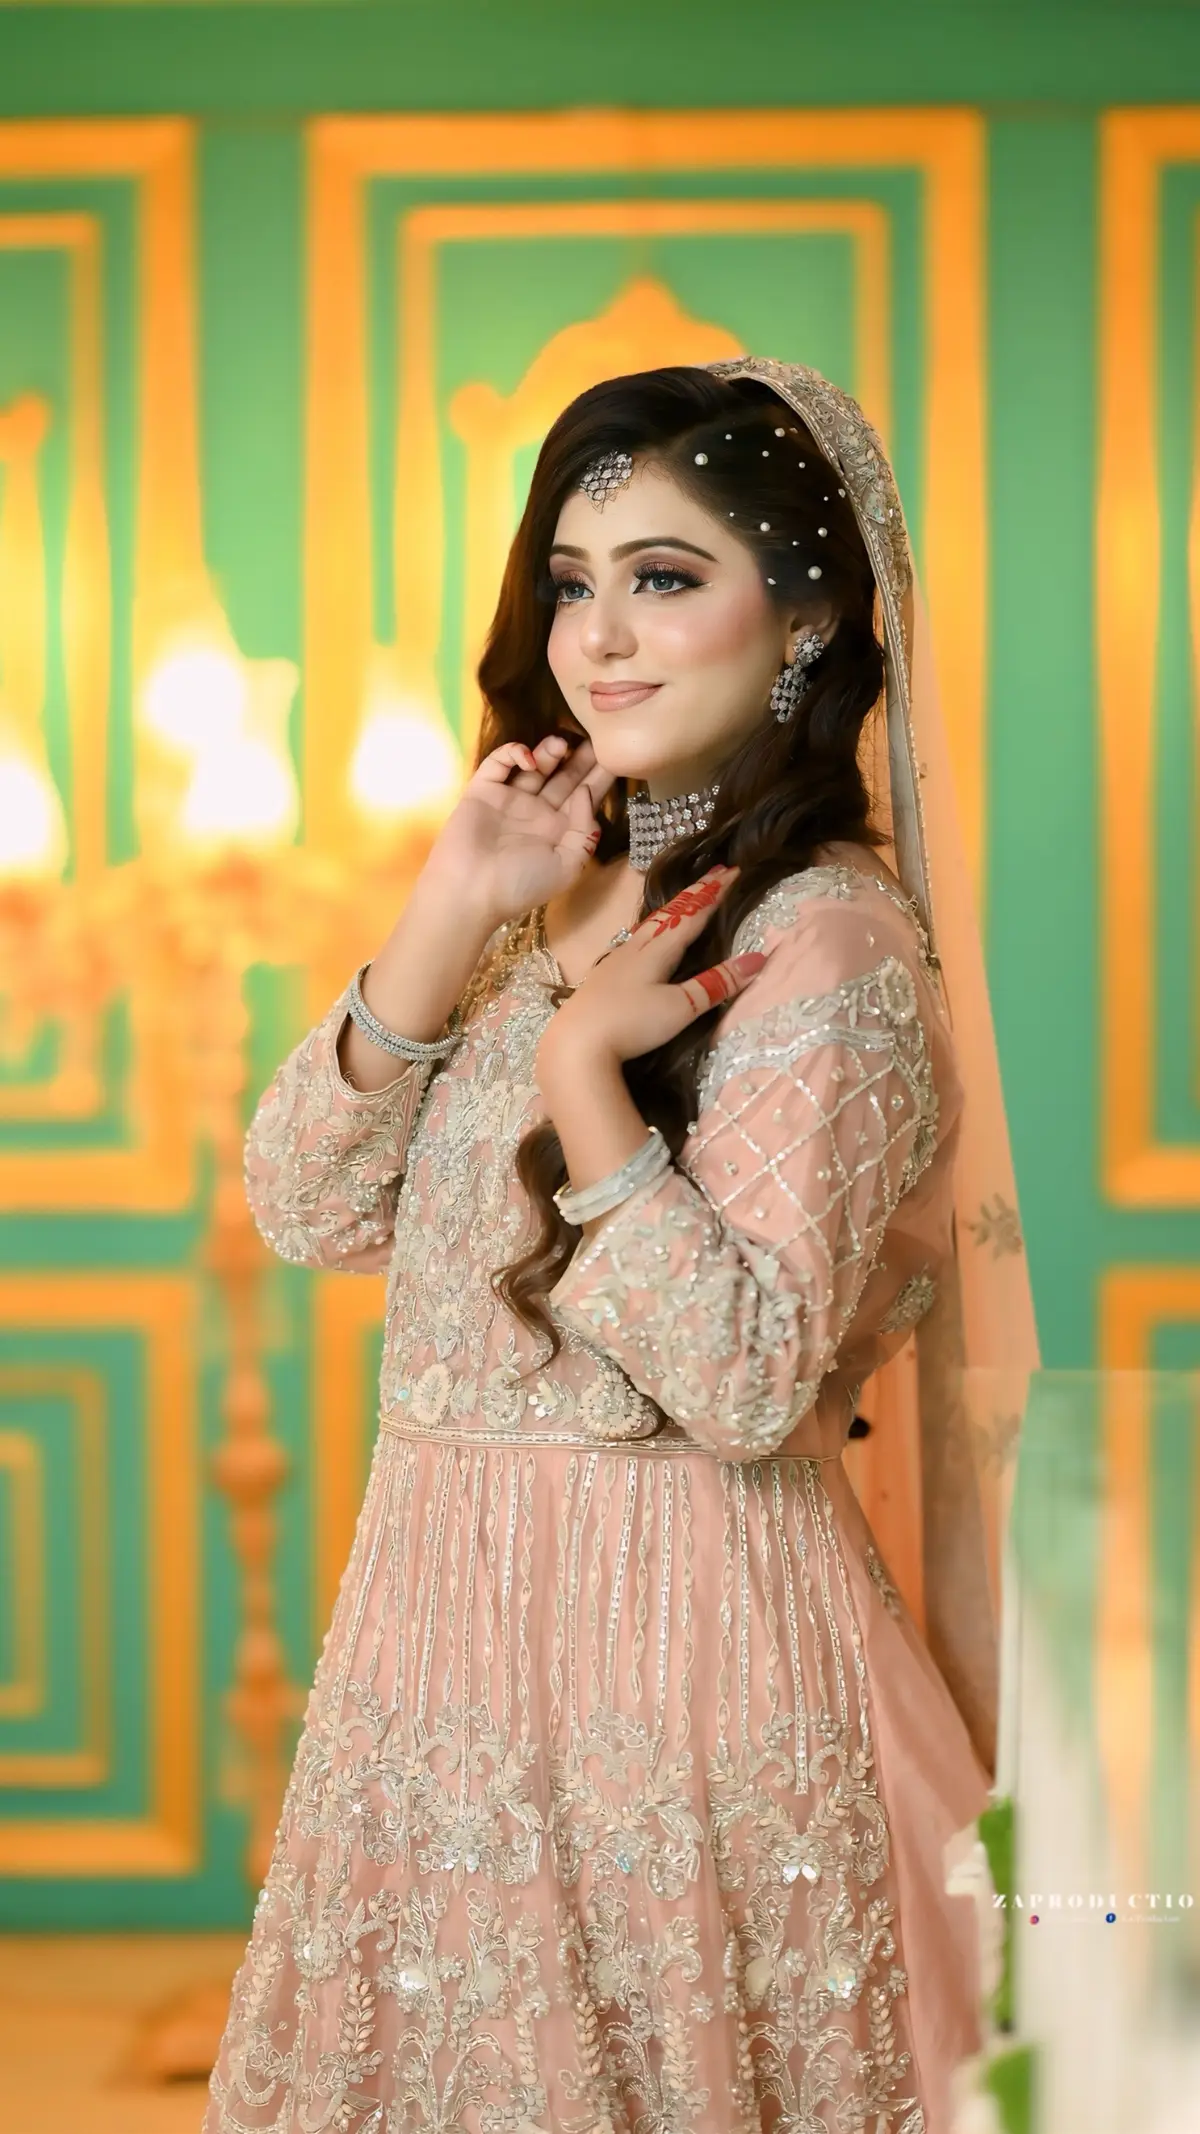 Walima Shoot for @RW signature salon , captured by @Z.a production 🇵🇰 🇵🇰 💫🙈🌸 #bismakanwal #fyp #foryou 